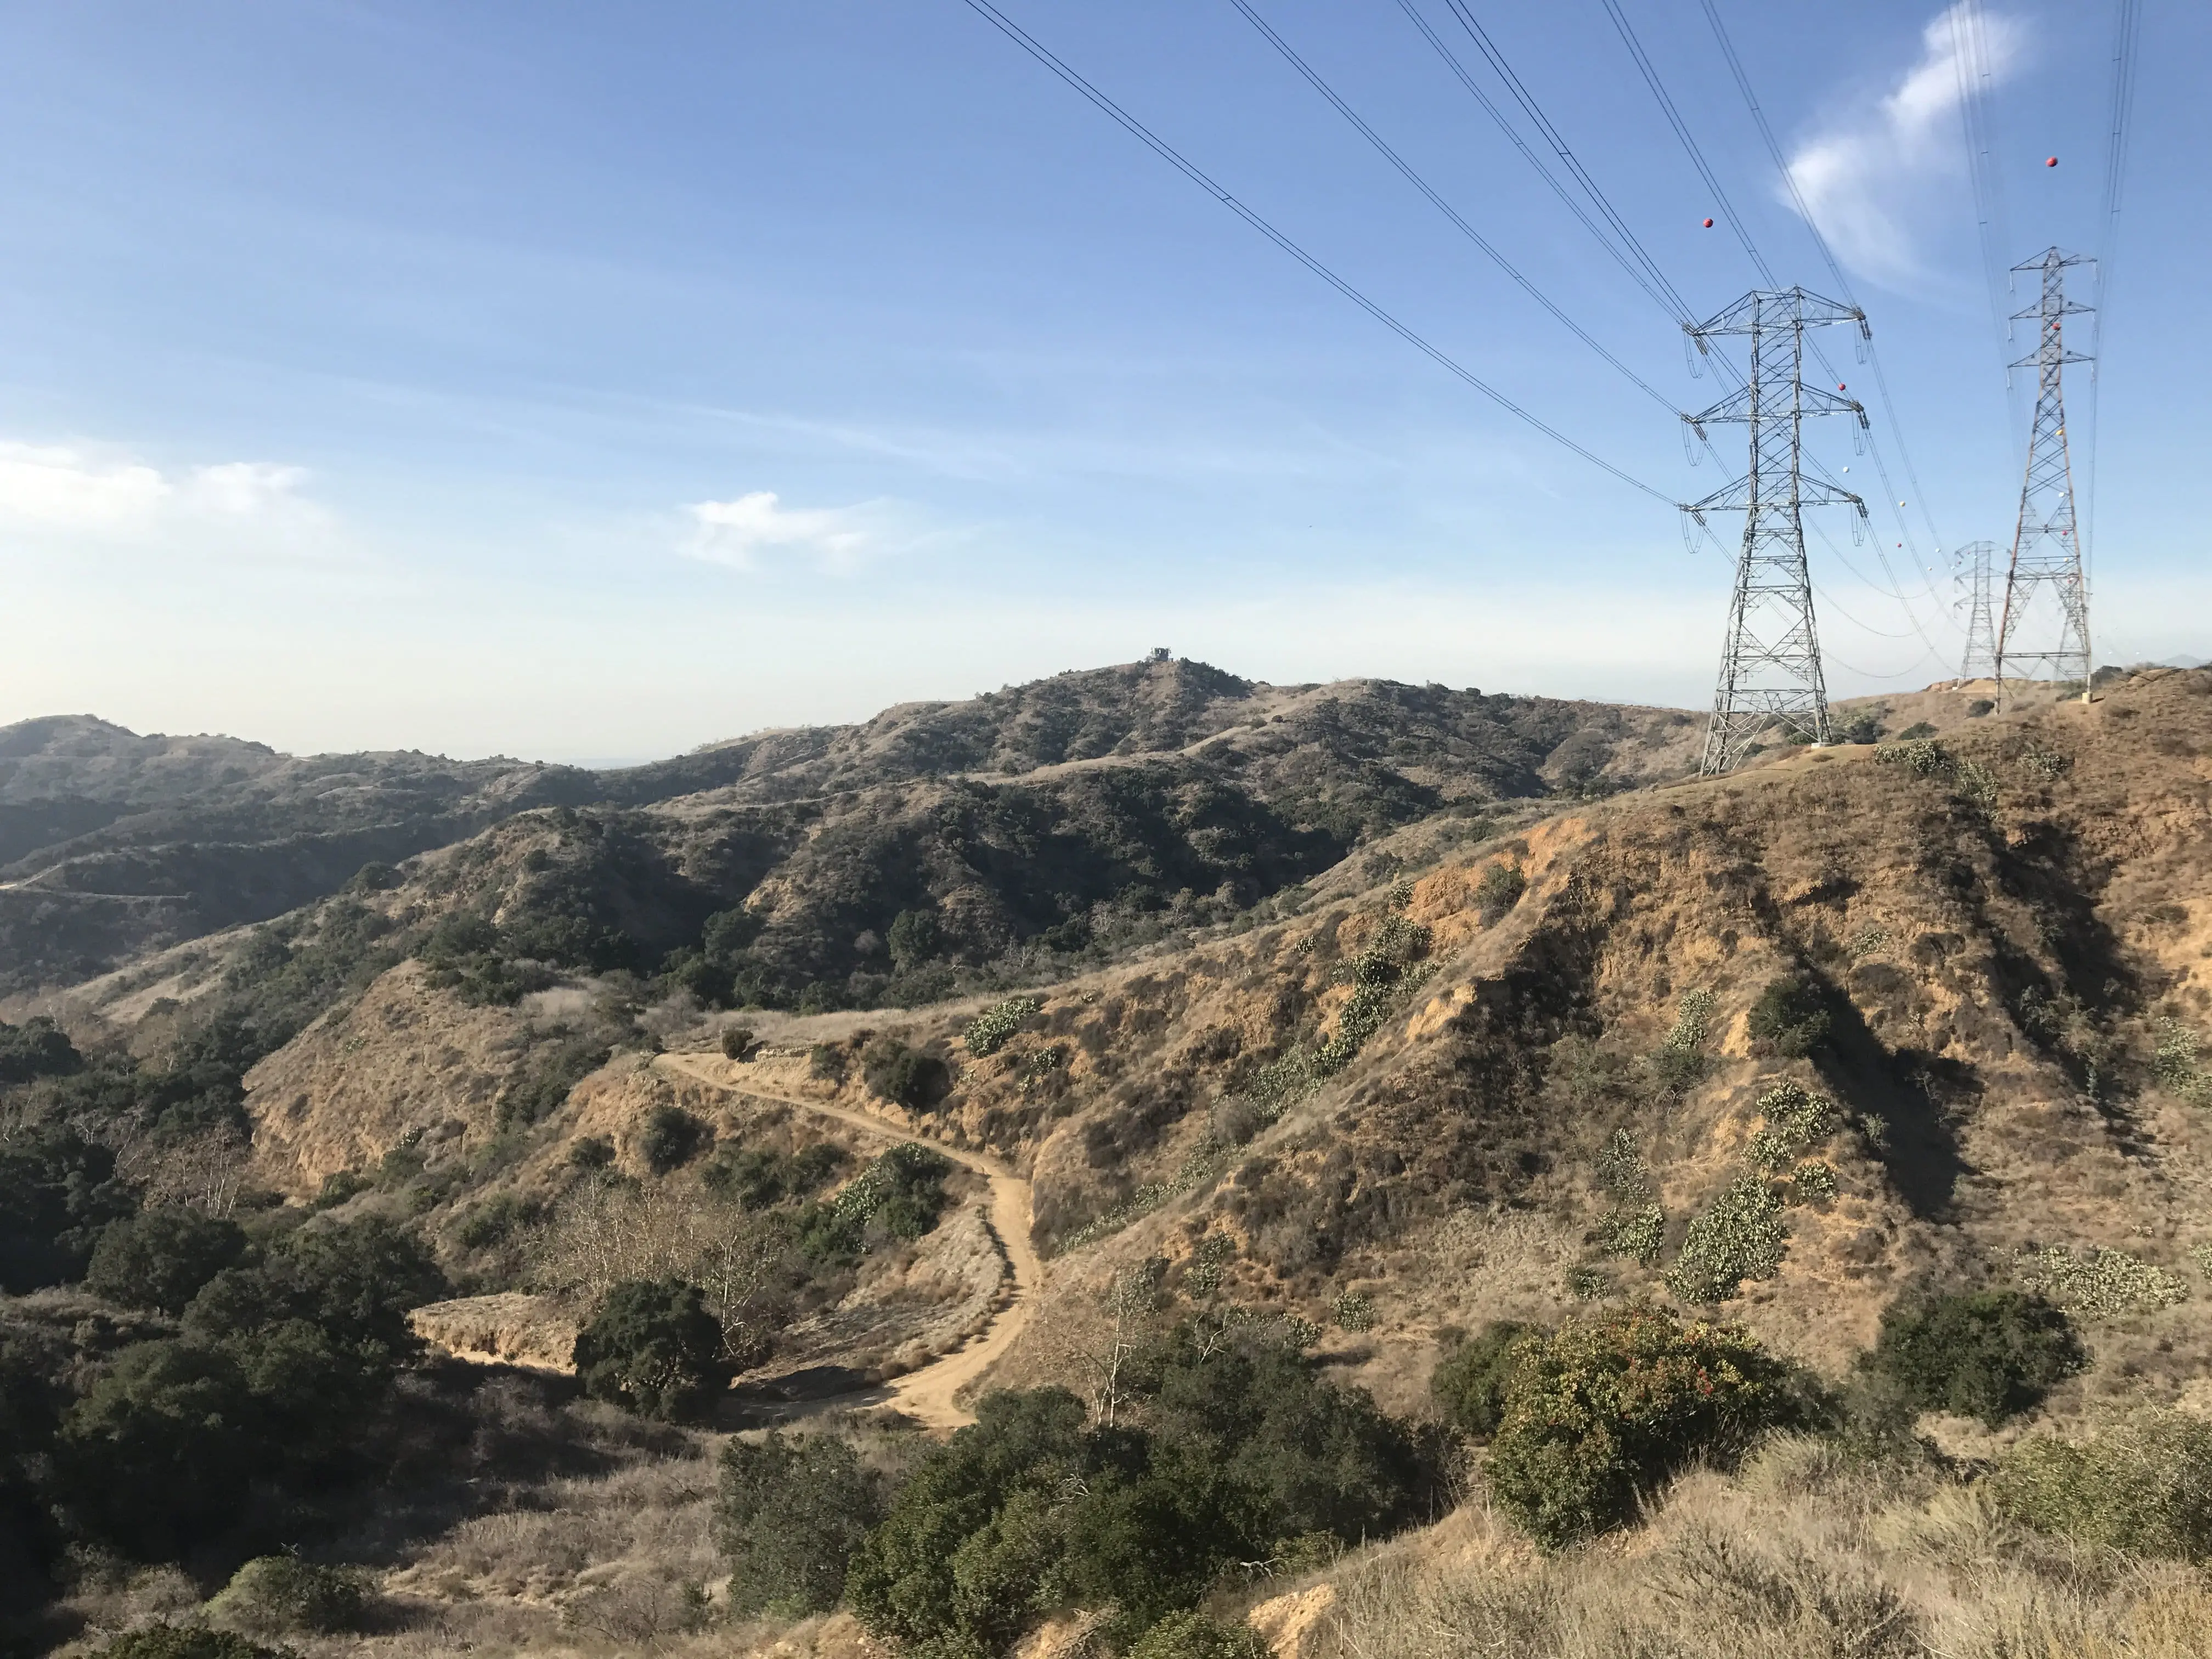 Turnbull Canyon Hiking Trails with power lines above